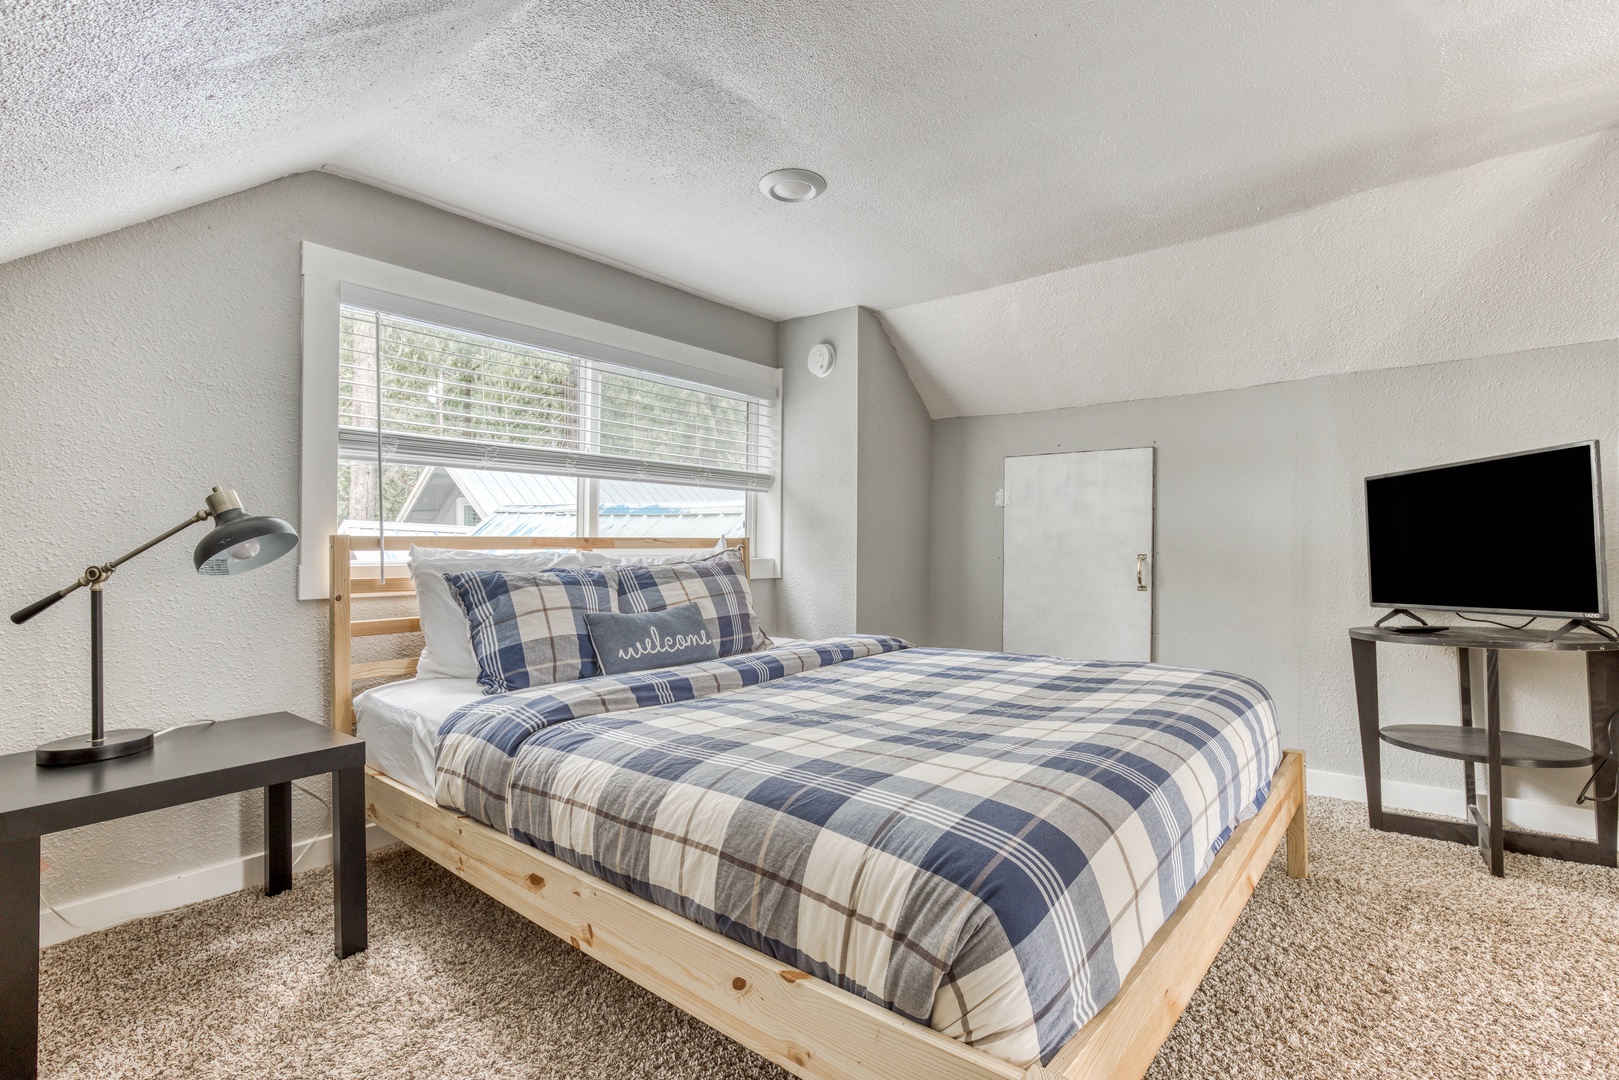 Rhododendron Vacation Rentals, Riverbend Cabin #2 - Queen bed in the loft